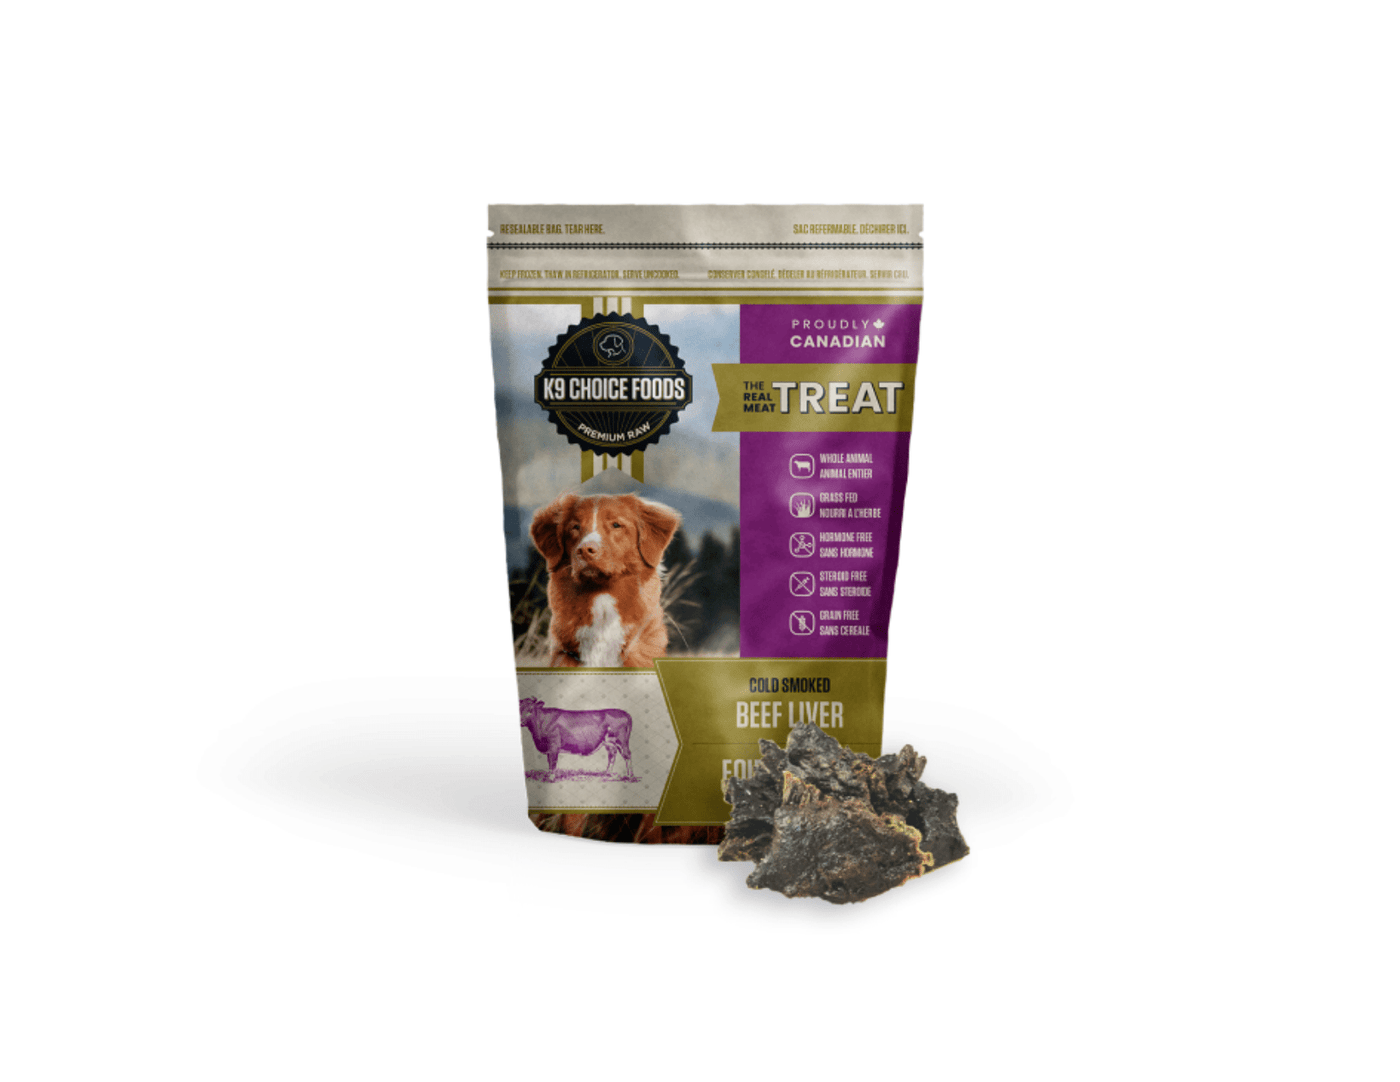 K9 Choice - Cold Smoked Beef Liver 227 g, Frozen Dog Treats - PetToba-K9 Choice Foods